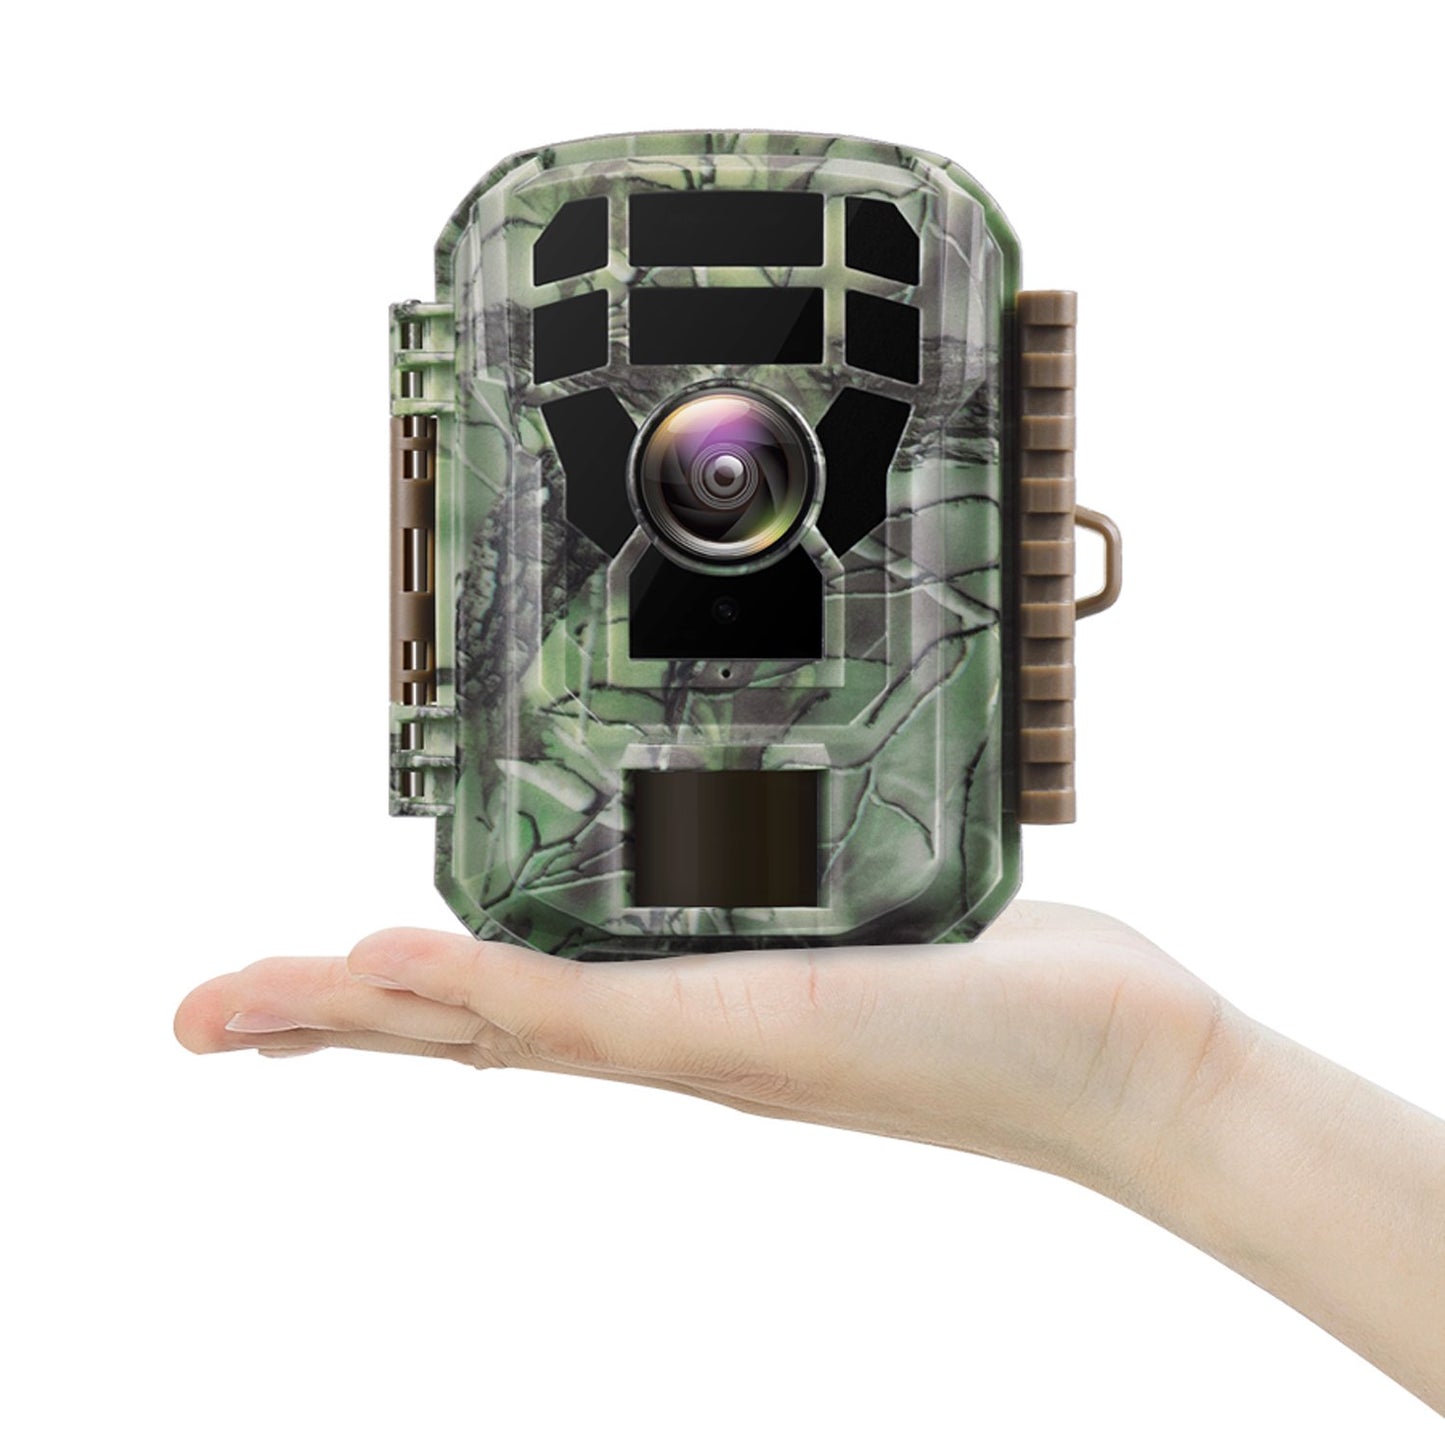 CAMPARK Trail Camera 16MP 1080P HD Deer Game Camera Waterproof Wildlife Scouting Hunting Trail Cam with 120° Wide Angle Lens and Night Vision 2.0" LCD IR LEDs